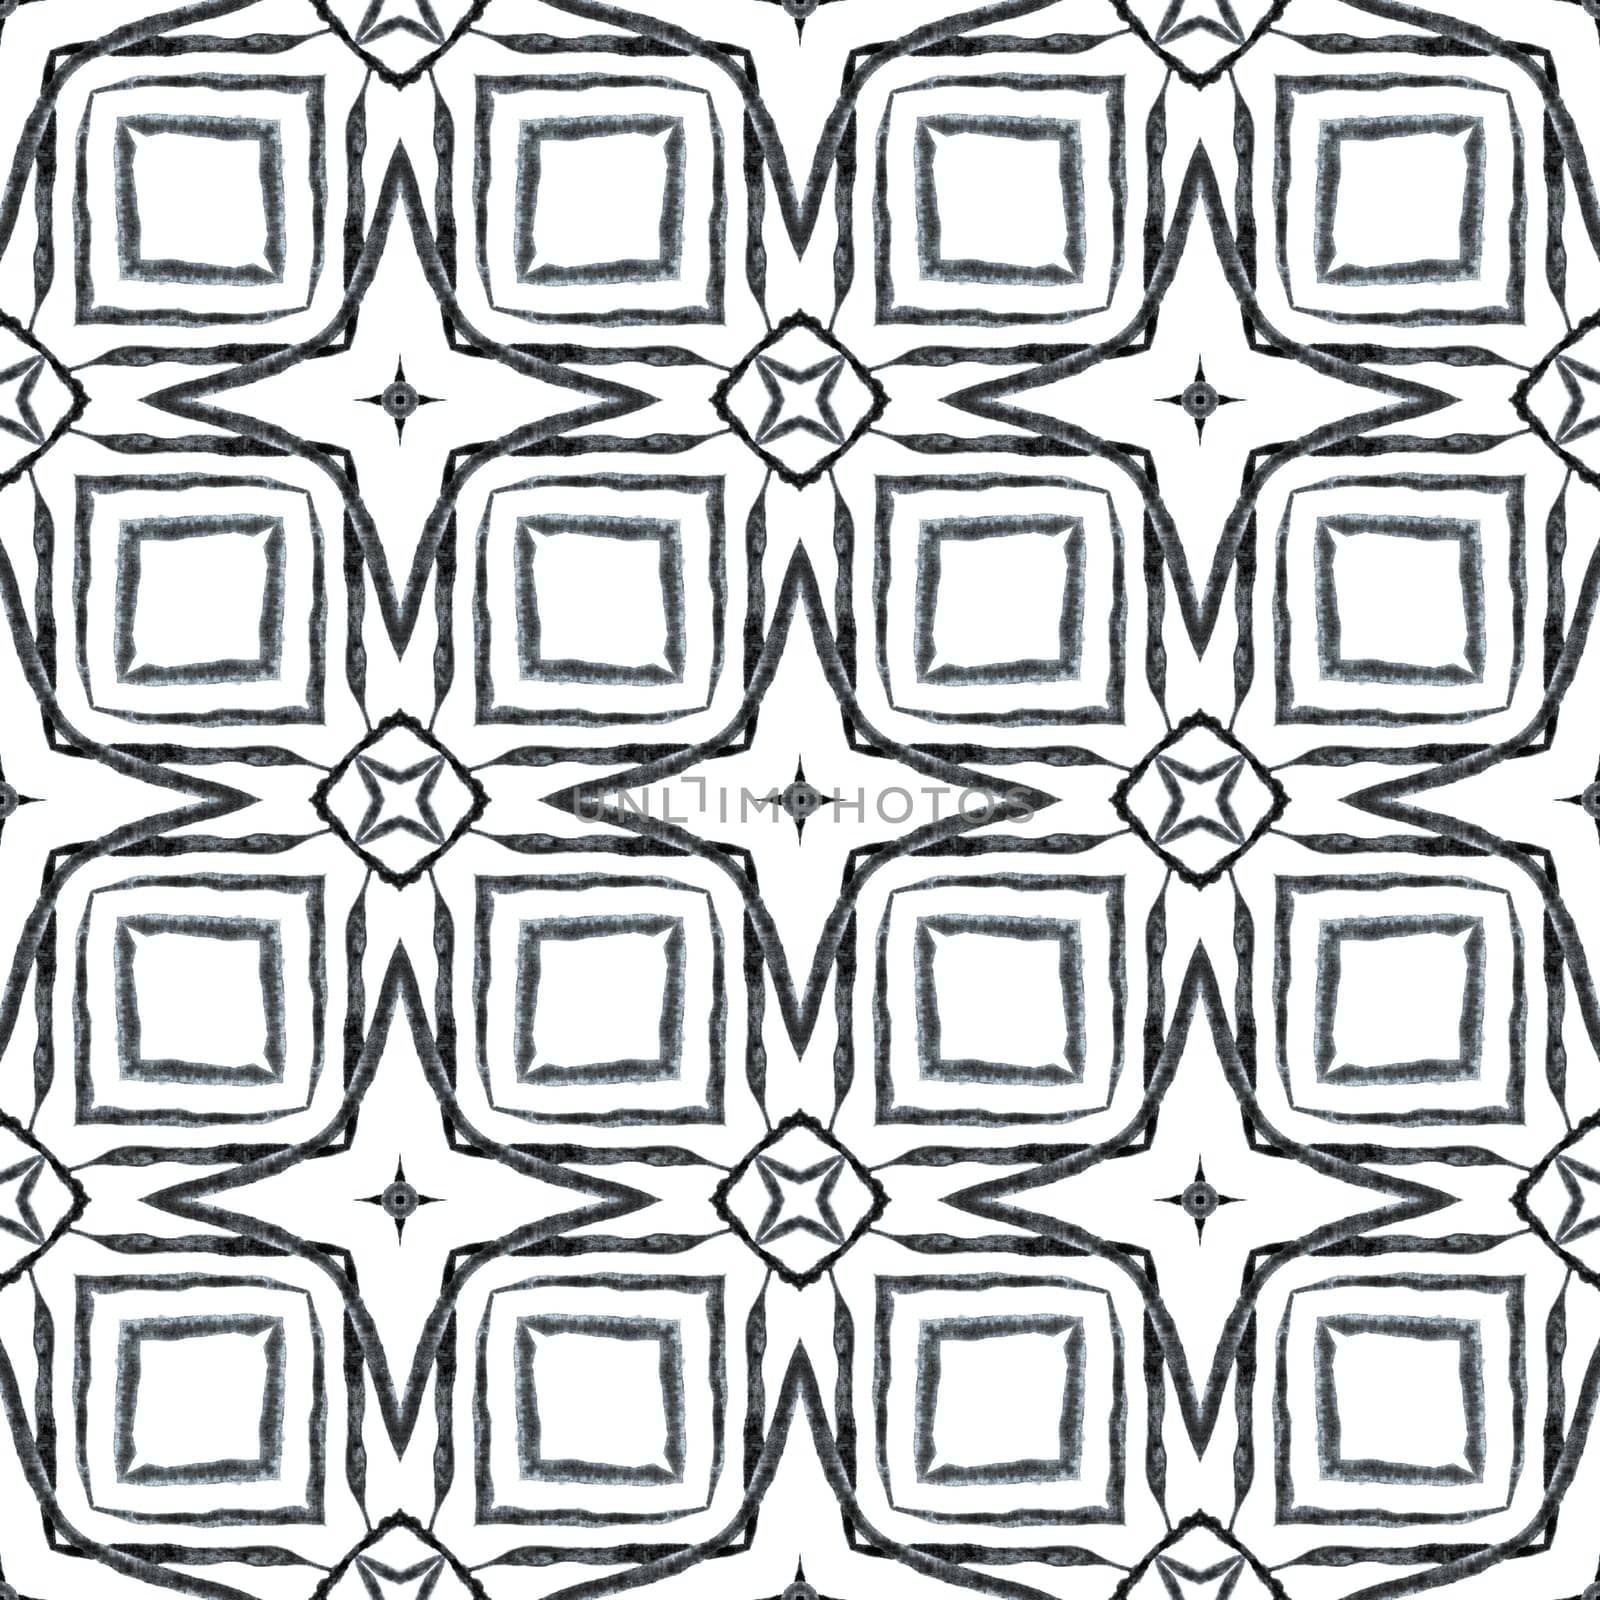 Textile ready lively print, swimwear fabric, wallpaper, wrapping. Black and white fresh boho chic summer design. Summer exotic seamless border. Exotic seamless pattern.